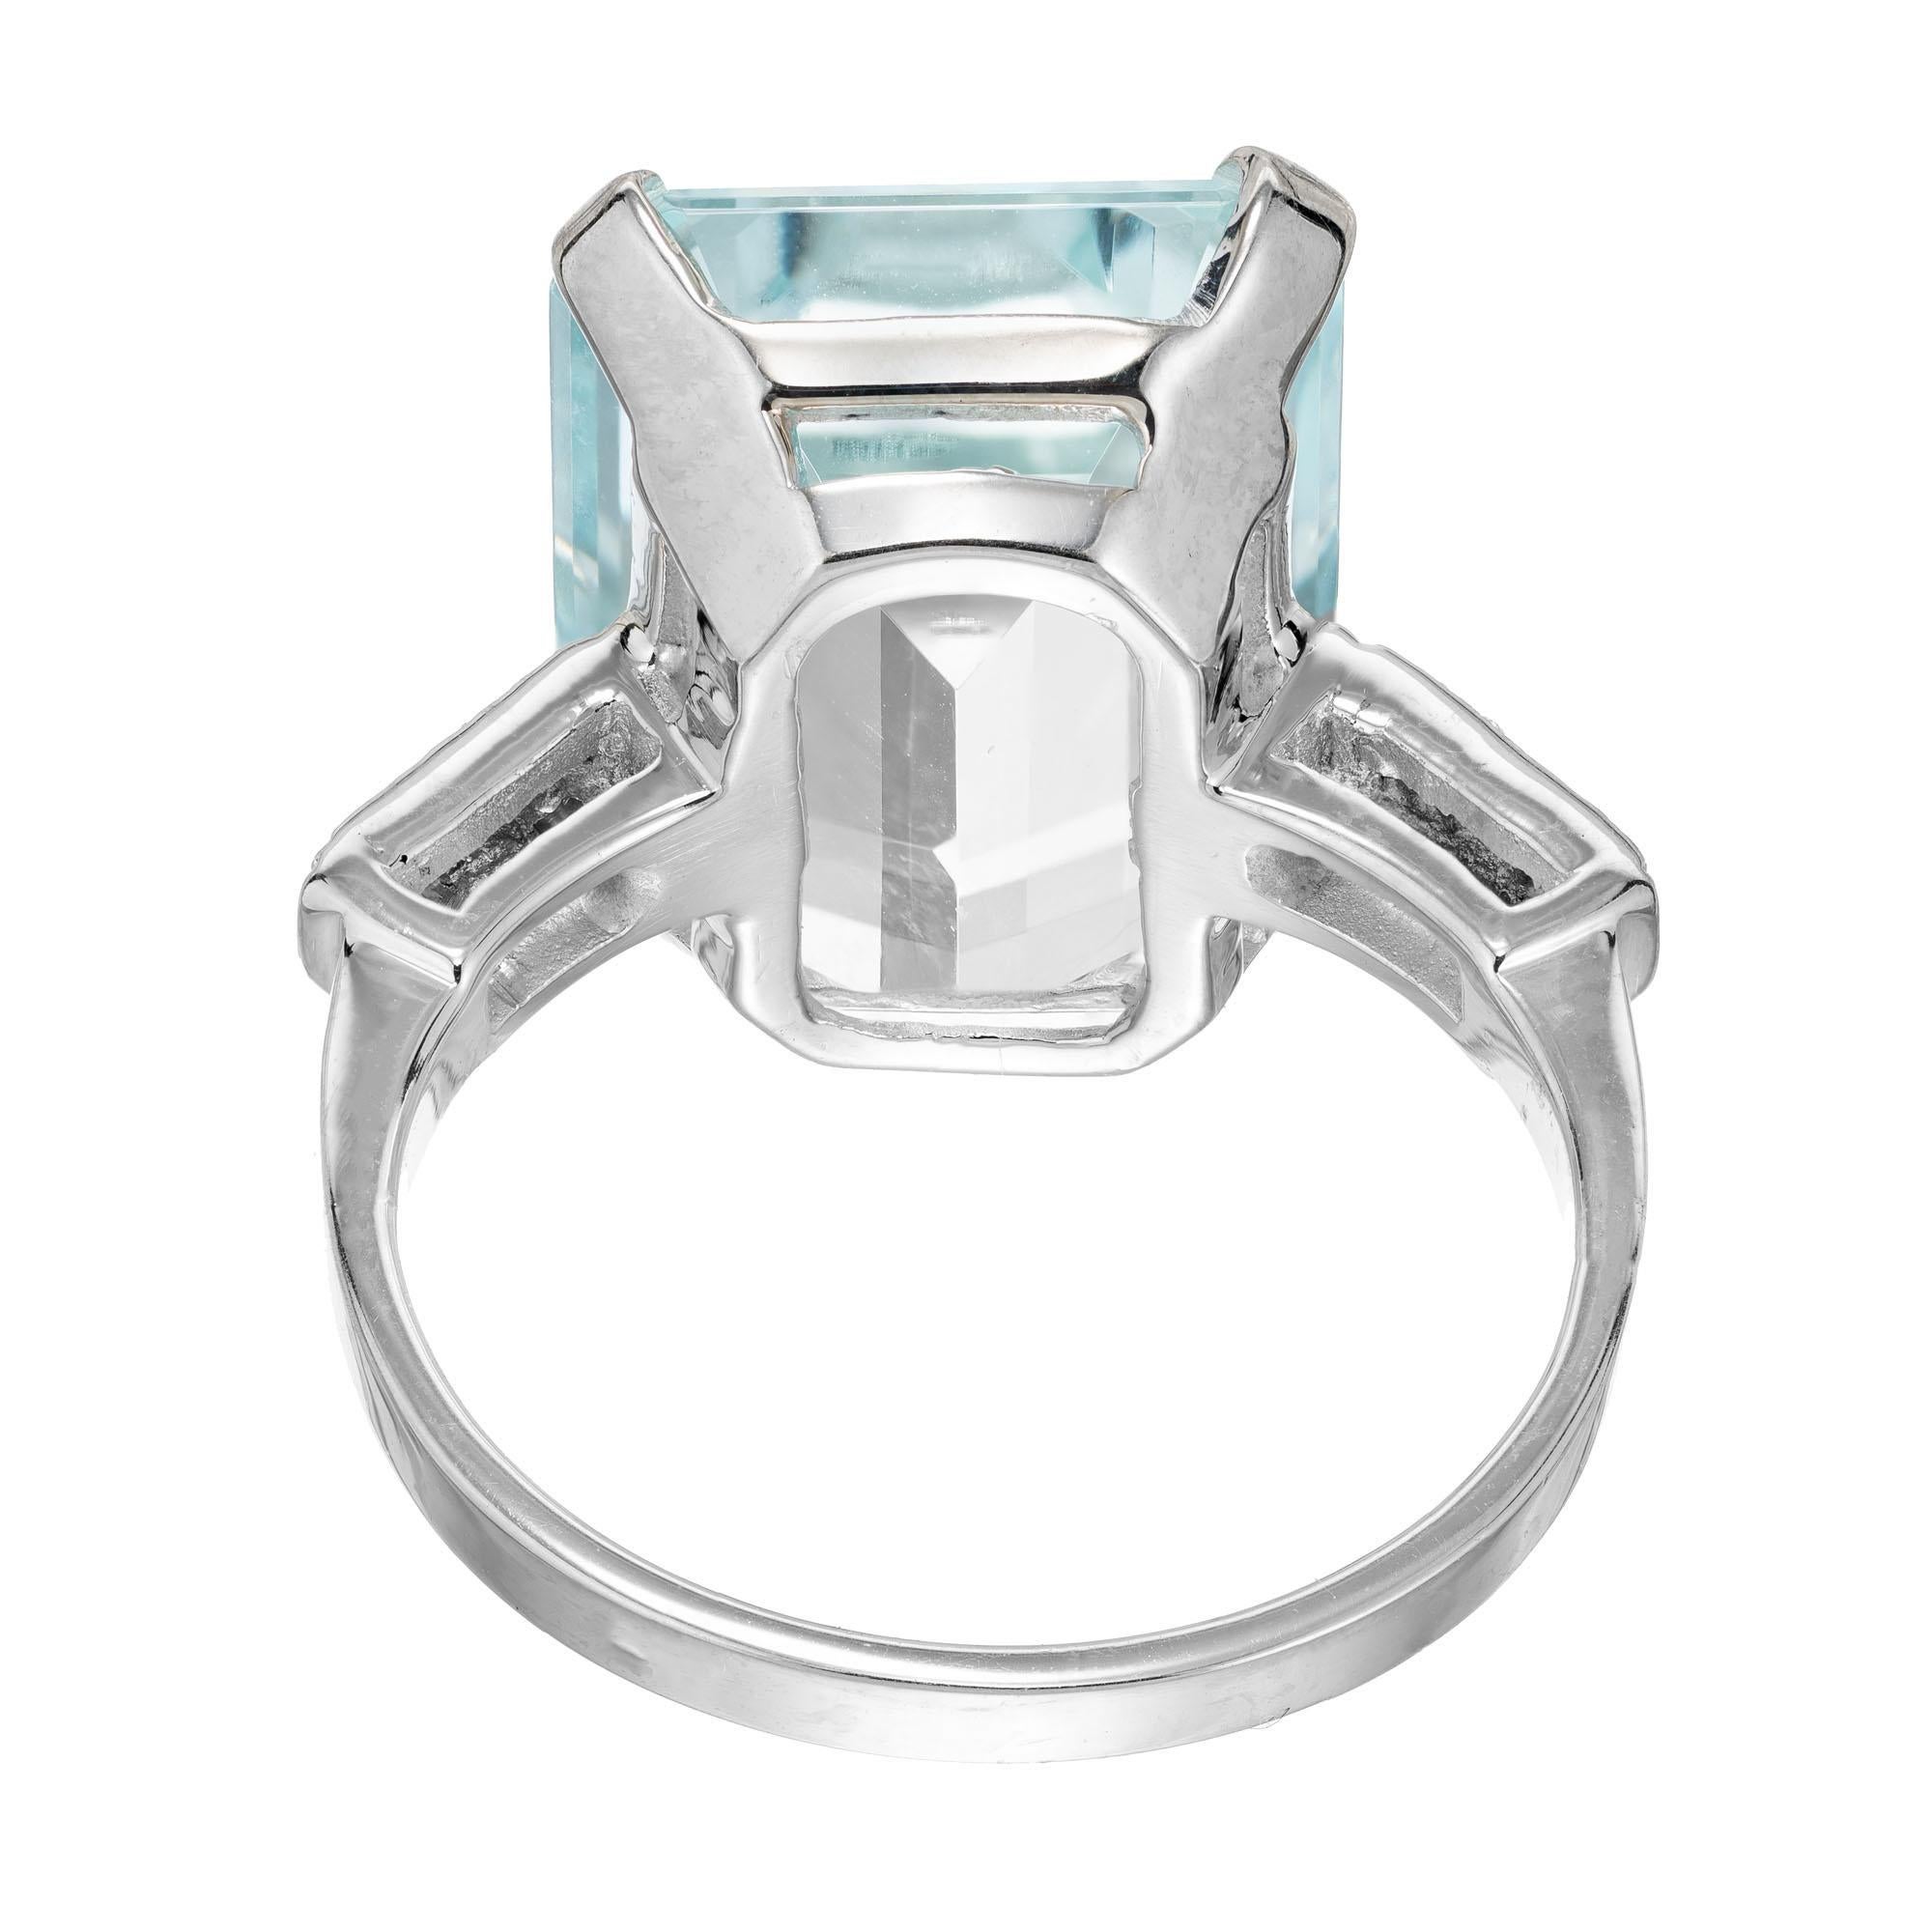 10.51 Aquamarine Diamond White Gold Cocktail Ring In Good Condition For Sale In Stamford, CT